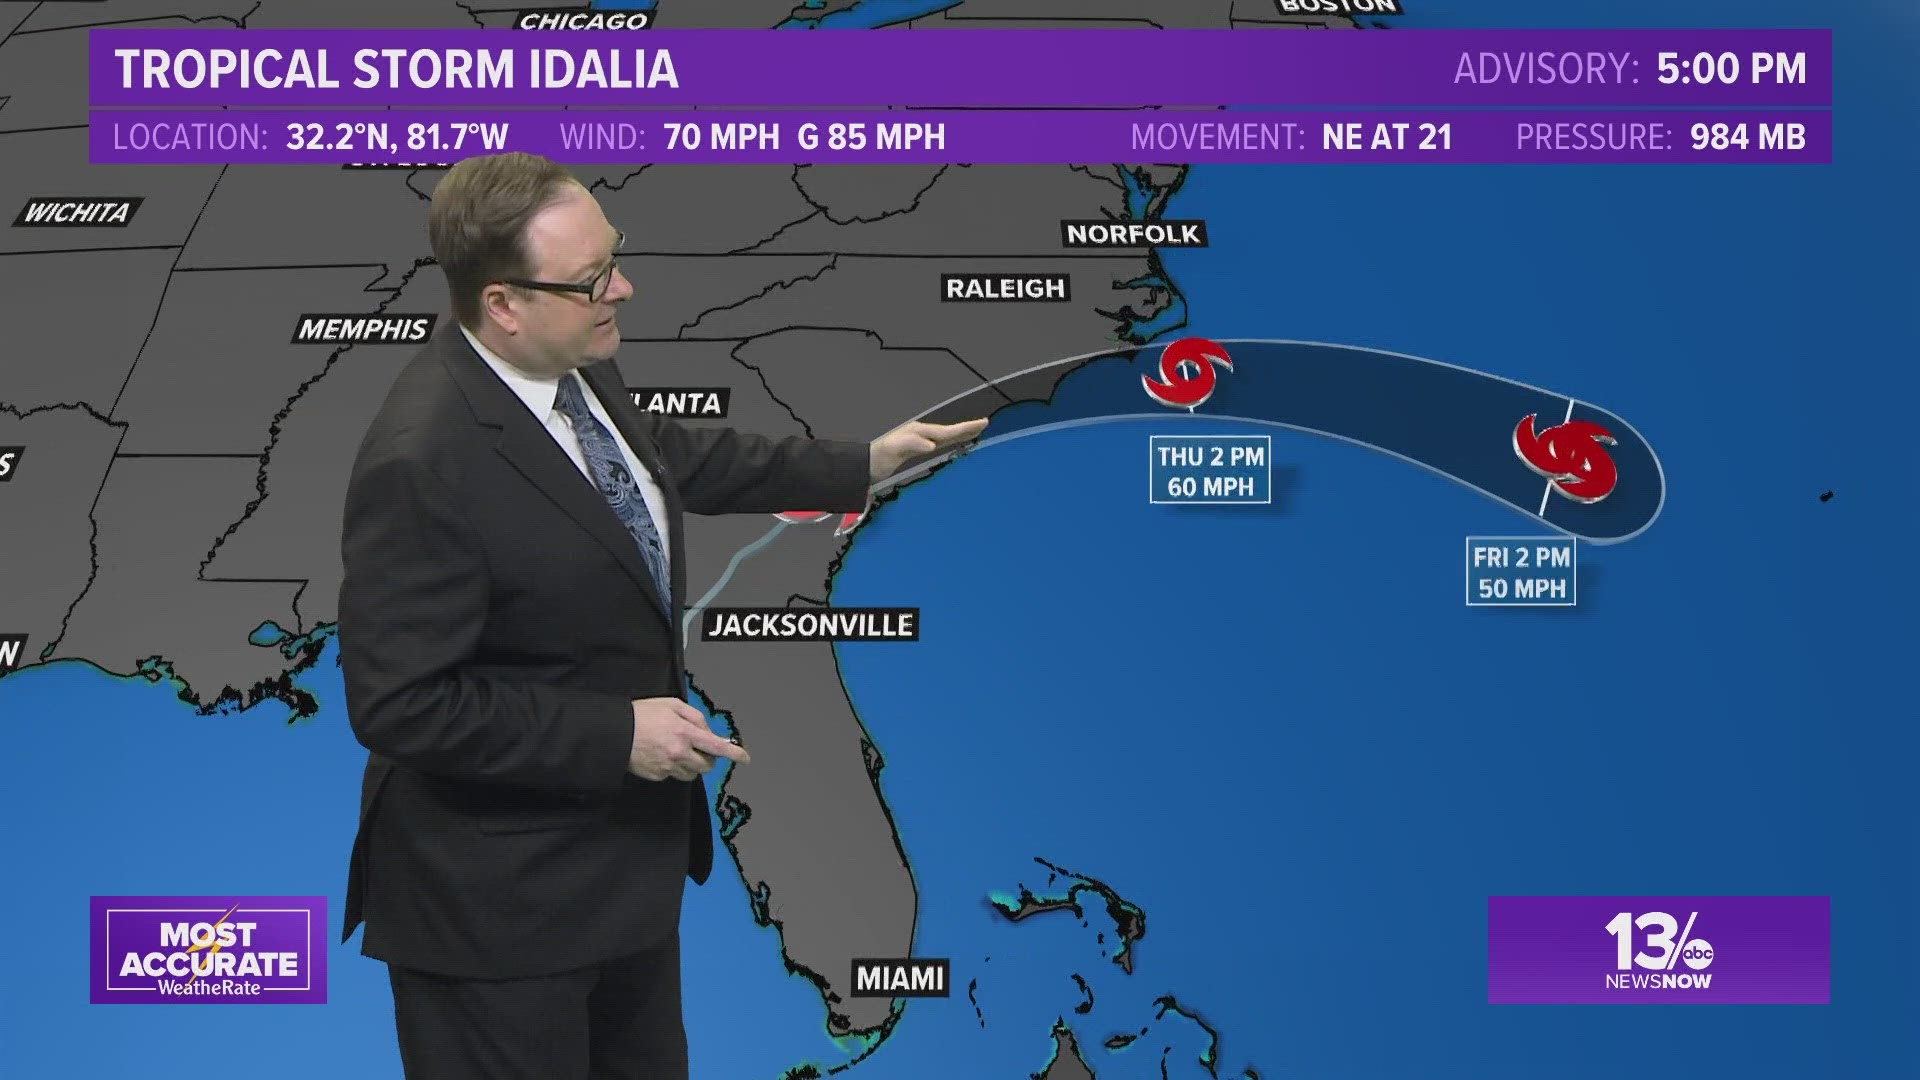 A Tropical Storm Warning has been issued for the Outer Banks and other coastal areas in North Carolina as Tropical Storm Idalia is expected to move through the area.